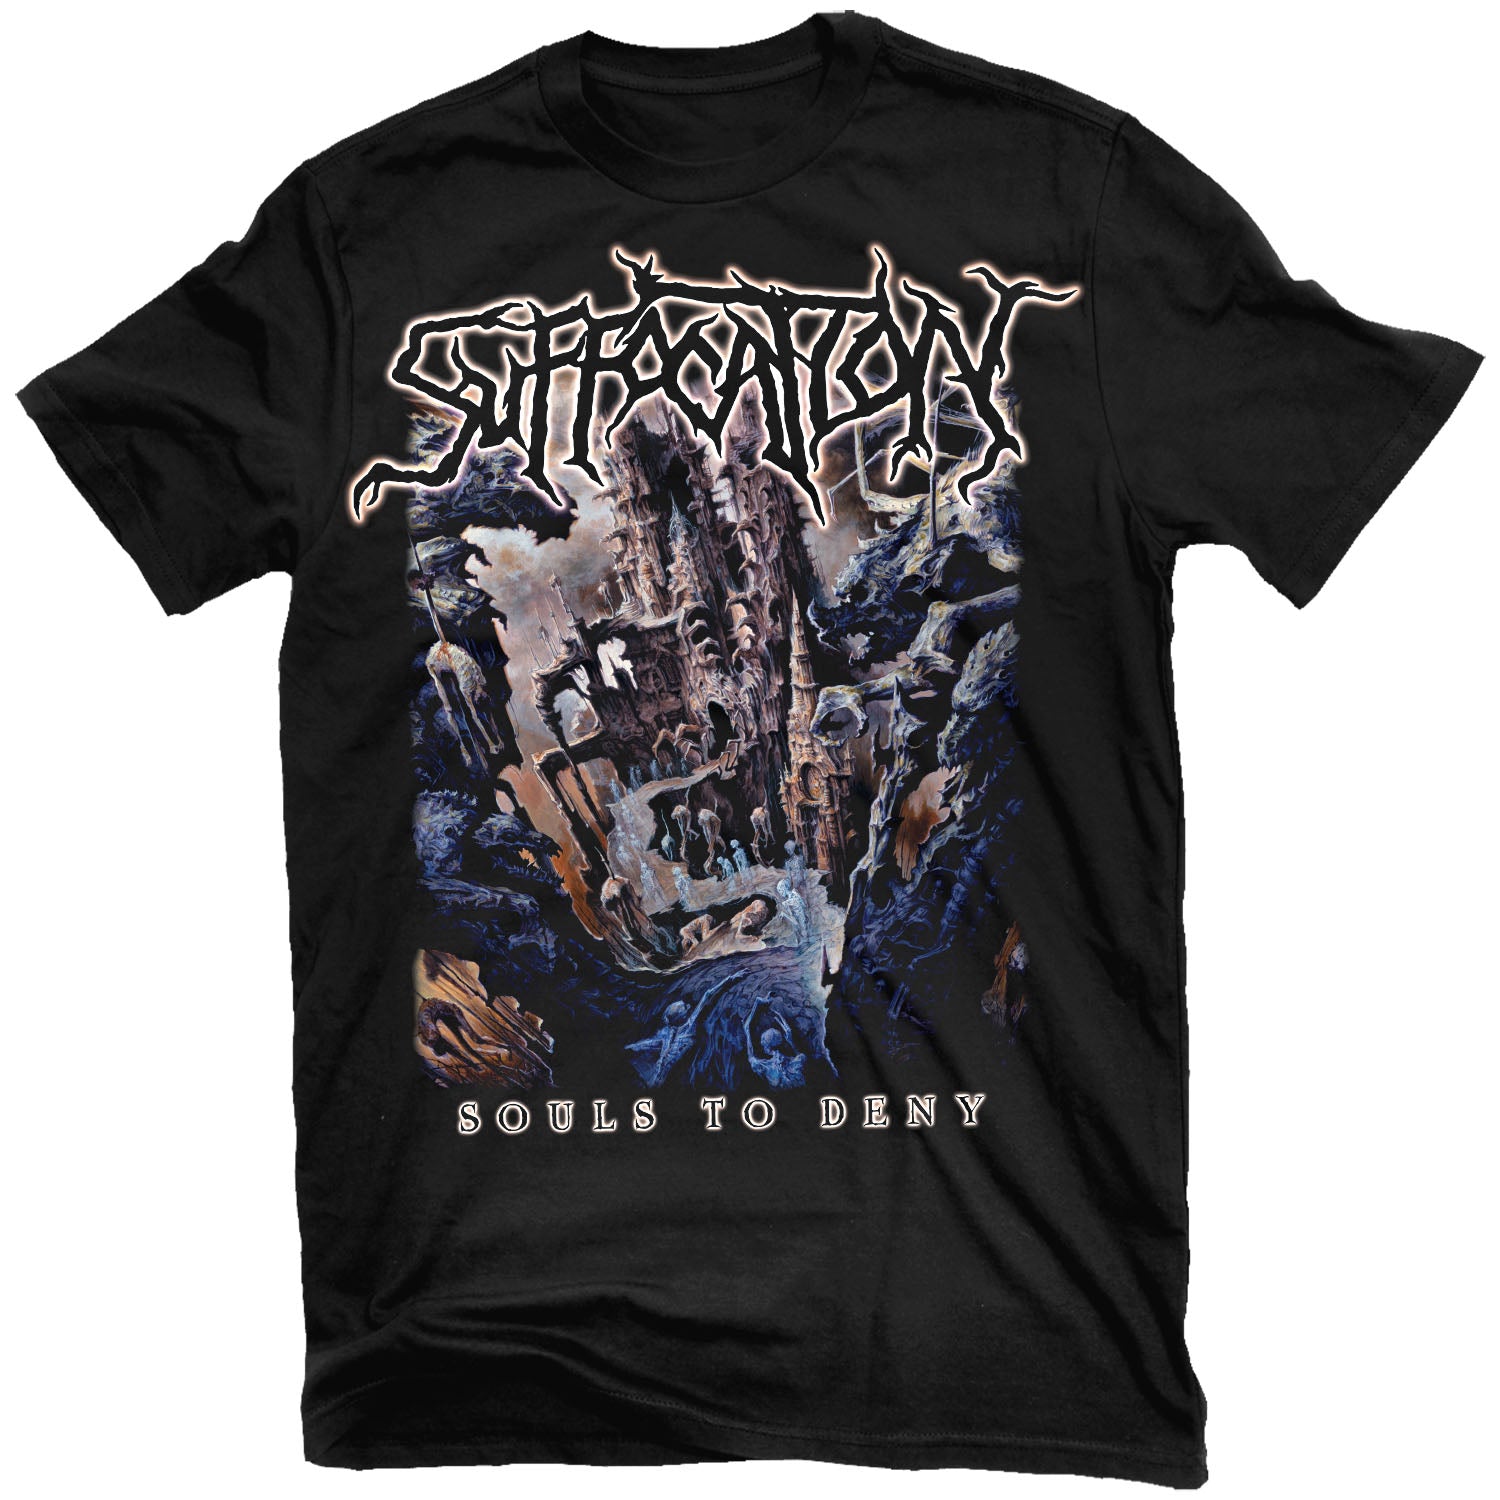 Suffocation "Souls To Deny" T-Shirt